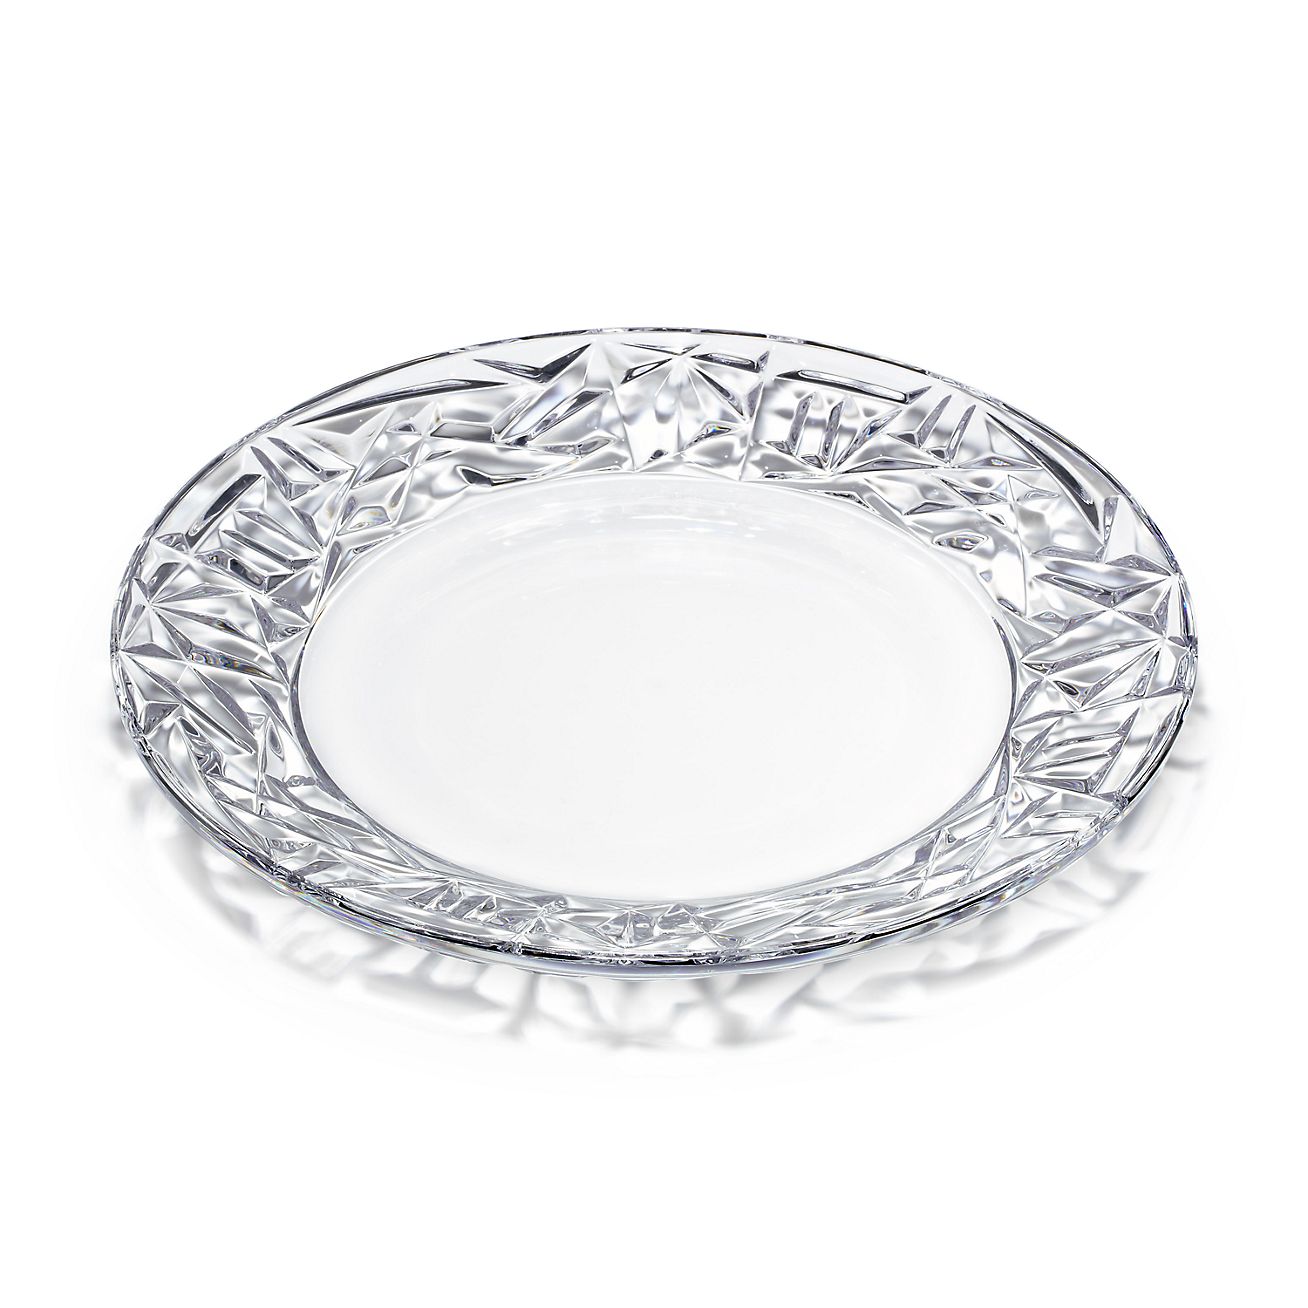 Rock-cut round platter in crystal glass 